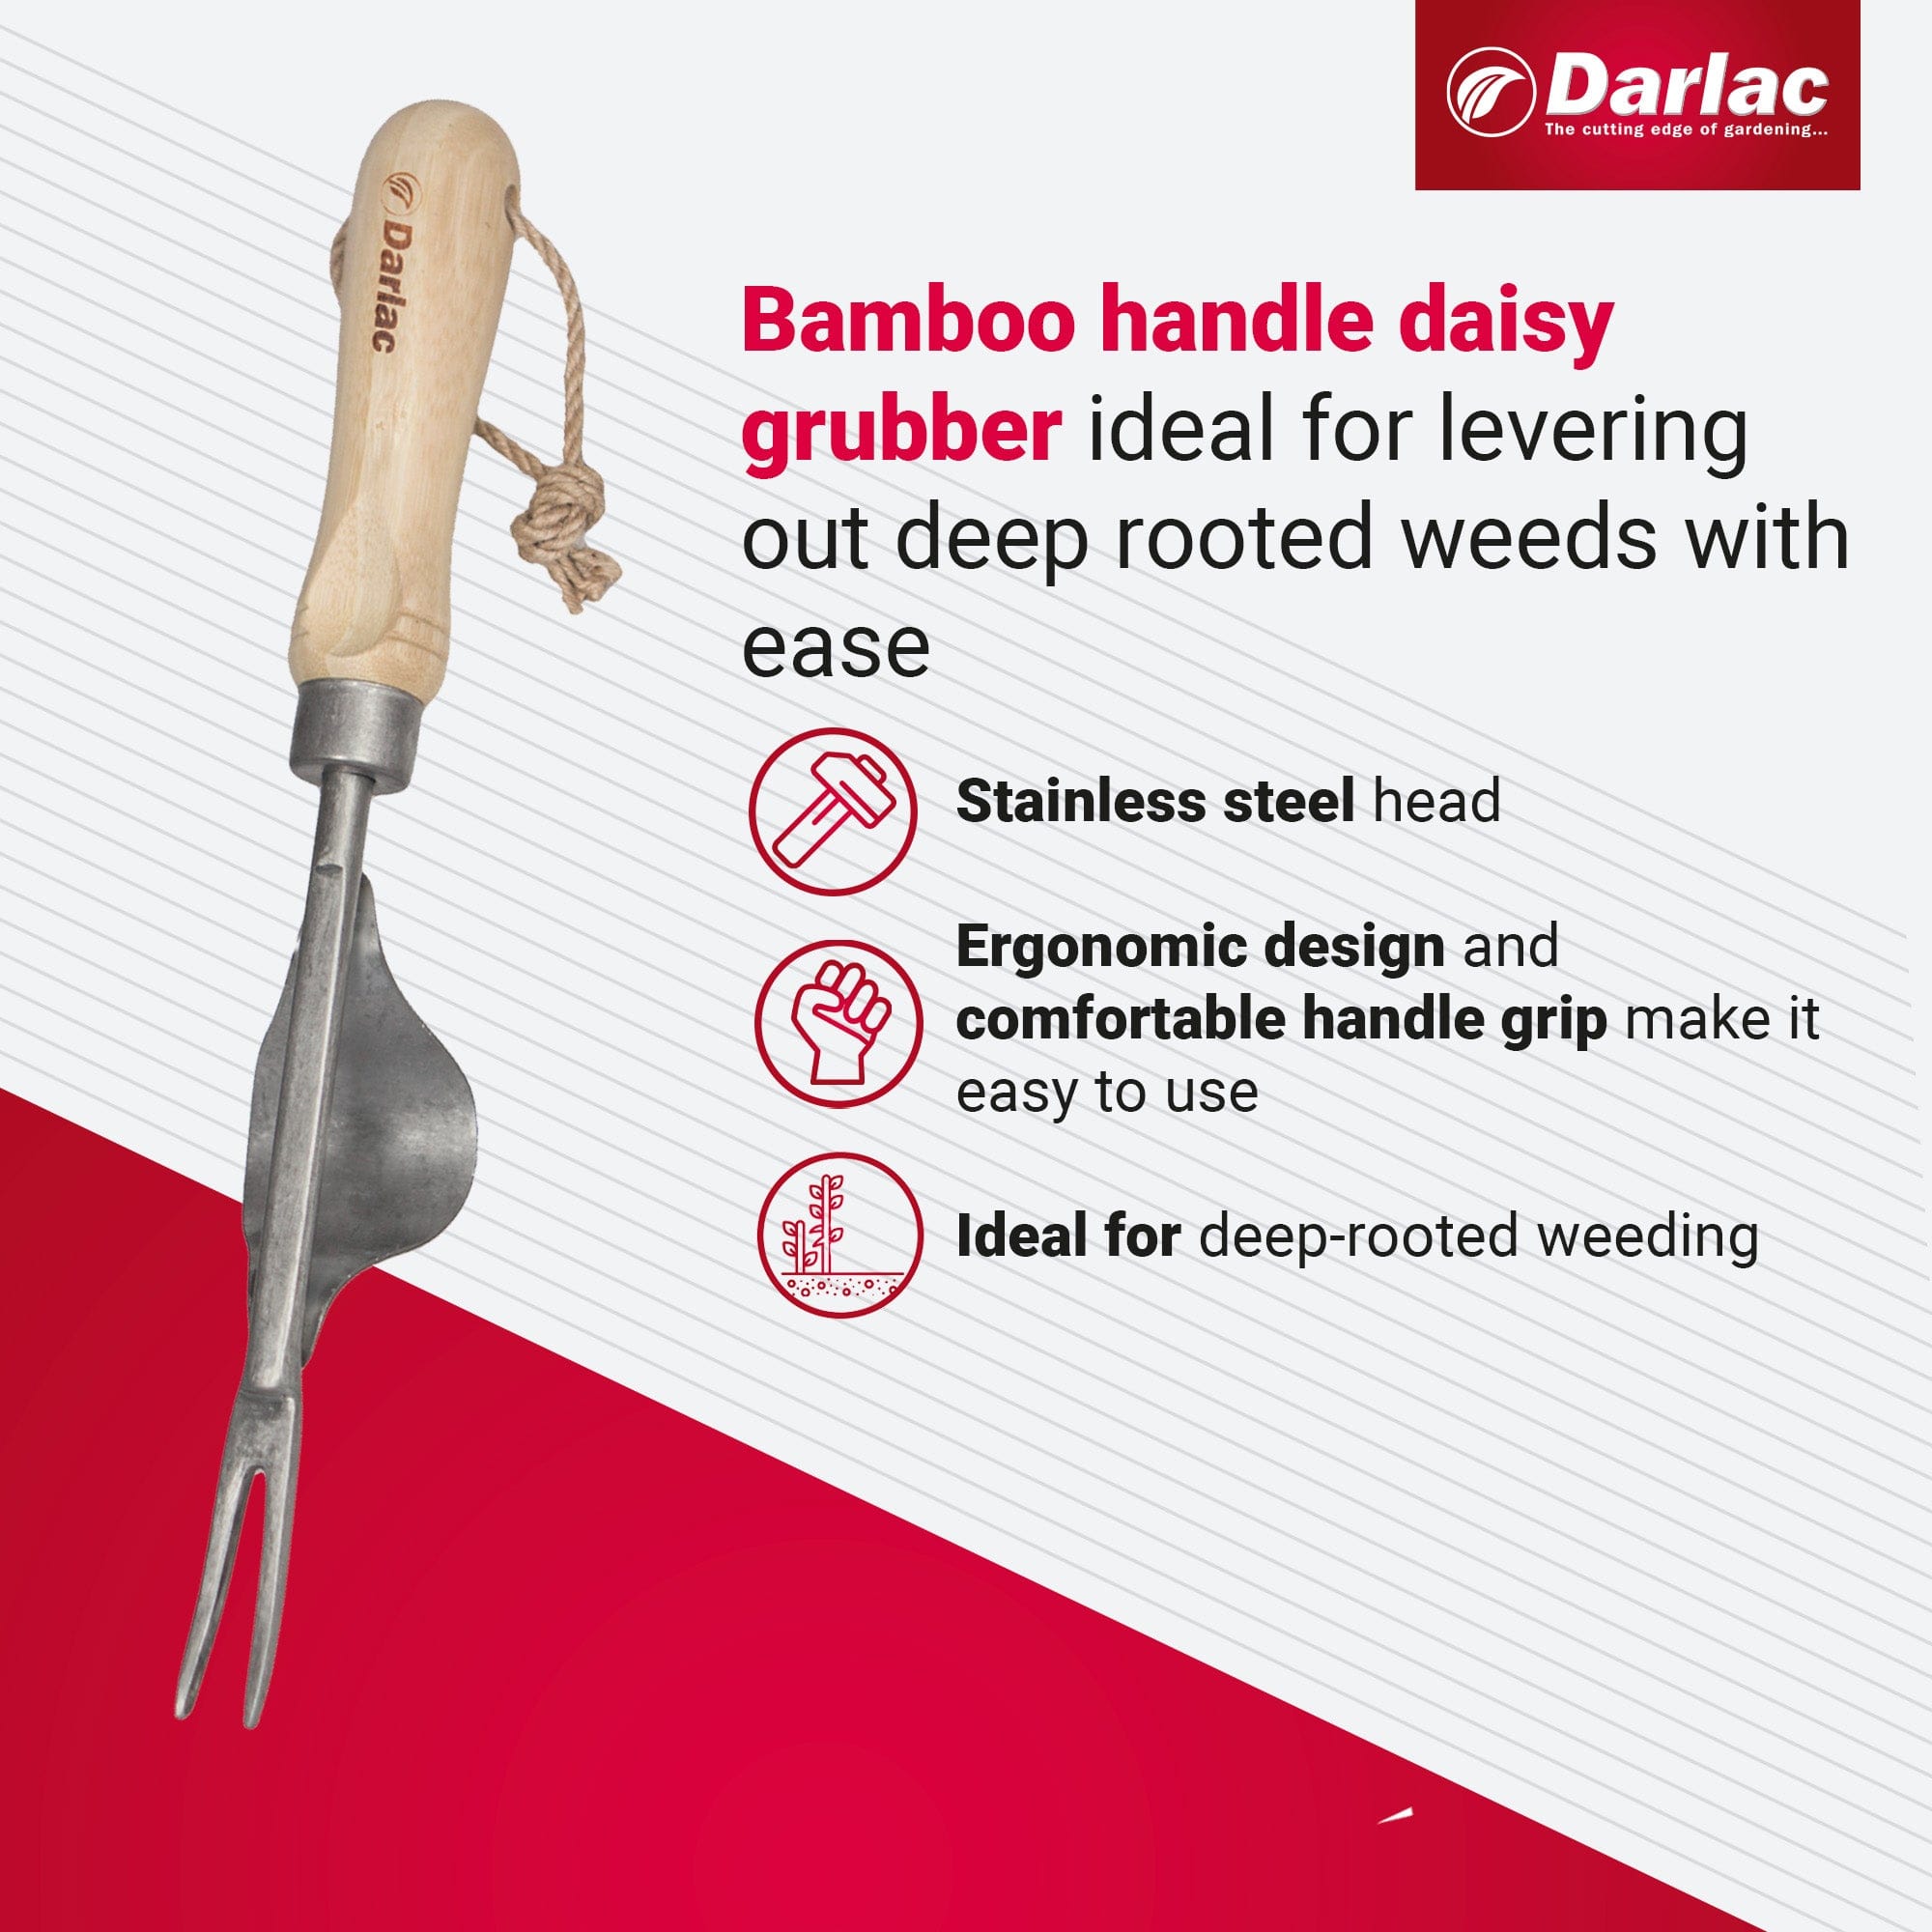 dt-brown HARDWARE Darlac Bamboo Daisy Grubber